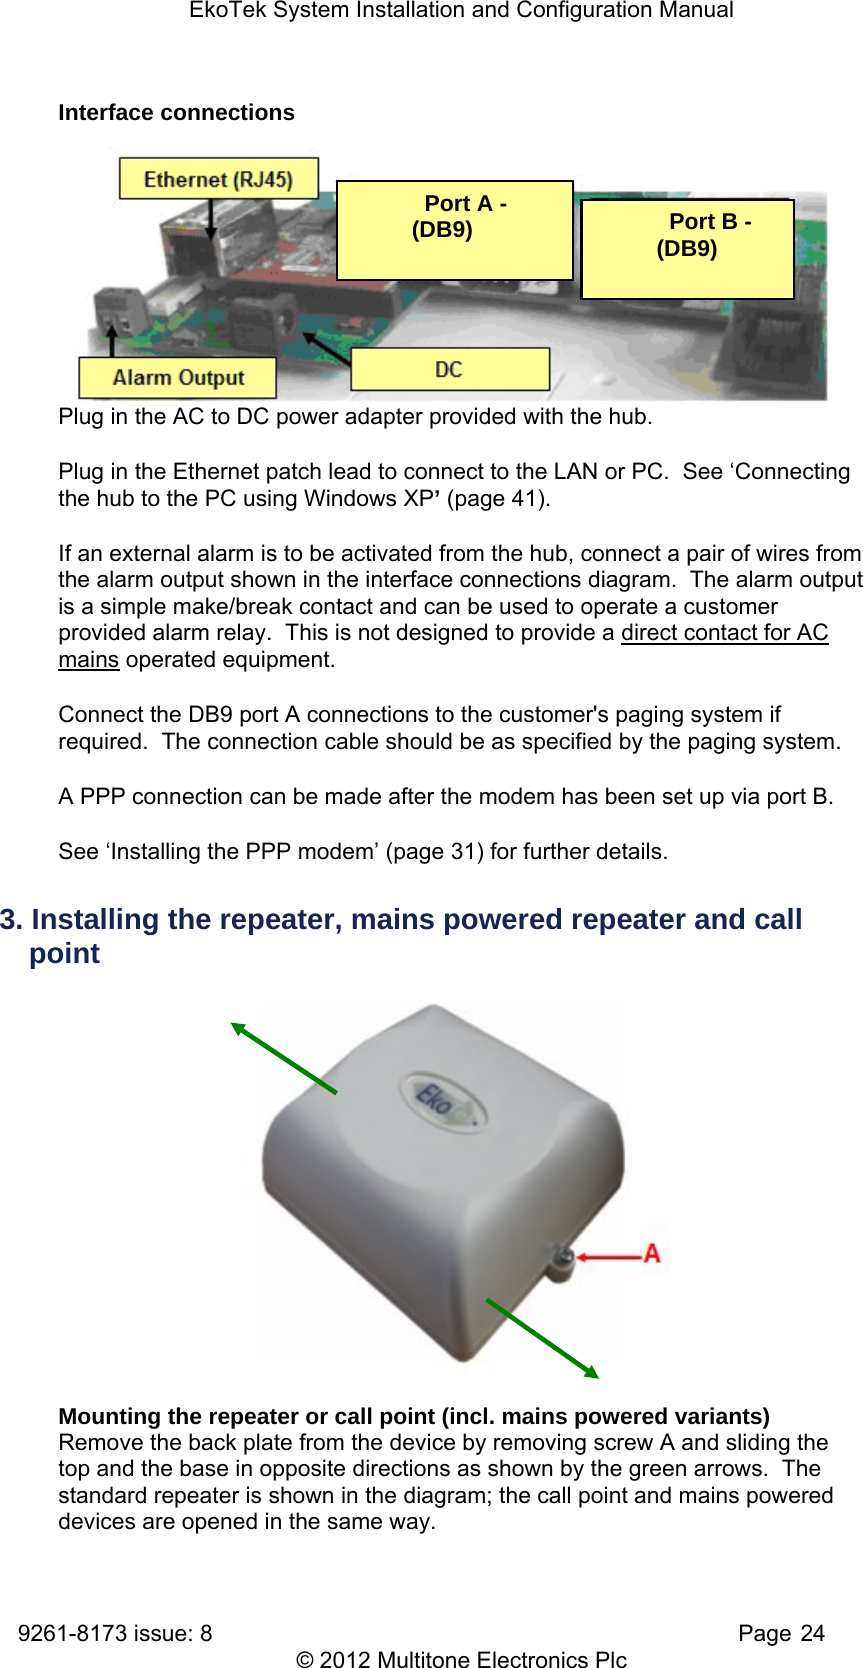 EkoTek System Installation and Configuration Manual 9261-8173 issue: 8   Page 24 © 2012 Multitone Electronics Plc Interface connections      Plug in the AC to DC power adapter provided with the hub. Plug in the Ethernet patch lead to connect to the LAN or PC.  See ‘Connecting the hub to the PC using Windows XP’ (page 41). If an external alarm is to be activated from the hub, connect a pair of wires from the alarm output shown in the interface connections diagram.  The alarm output is a simple make/break contact and can be used to operate a customer provided alarm relay.  This is not designed to provide a direct contact for AC mains operated equipment. Connect the DB9 port A connections to the customer&apos;s paging system if required.  The connection cable should be as specified by the paging system. A PPP connection can be made after the modem has been set up via port B.  See ‘Installing the PPP modem’ (page 31) for further details. 3. Installing the repeater, mains powered repeater and call point  Mounting the repeater or call point (incl. mains powered variants) Remove the back plate from the device by removing screw A and sliding the top and the base in opposite directions as shown by the green arrows.  The standard repeater is shown in the diagram; the call point and mains powered devices are opened in the same way.   Port A - (DB9)    Port B - (DB9) 